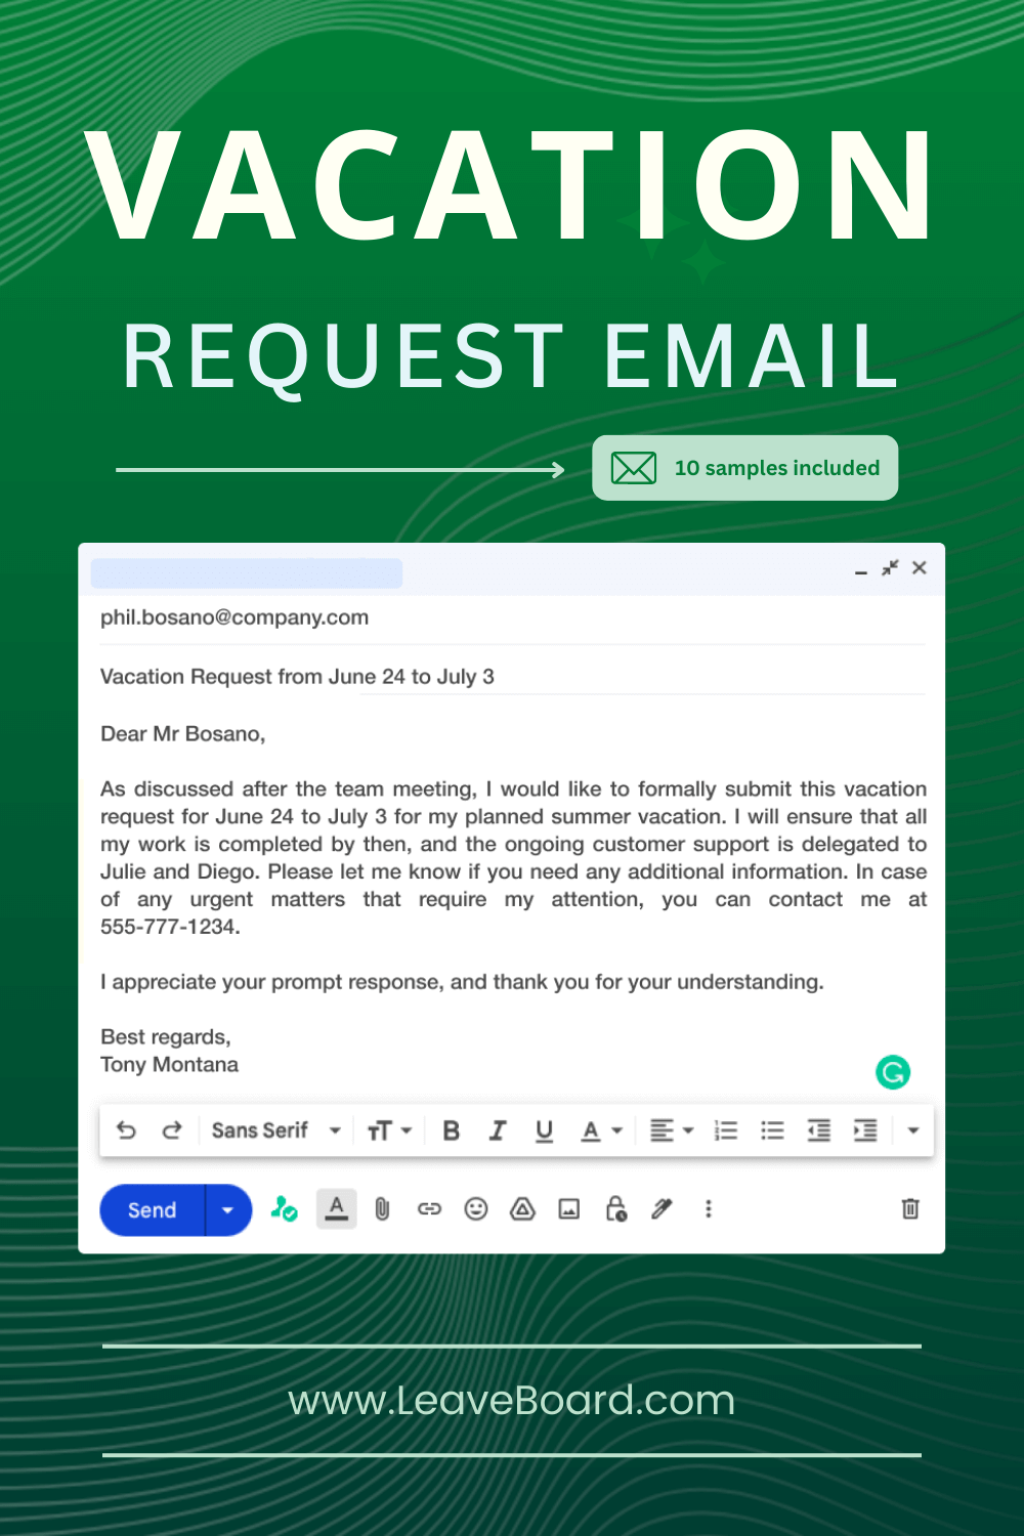 travel plan request email - How to Write a Compelling Vacation Request Email (with Ten